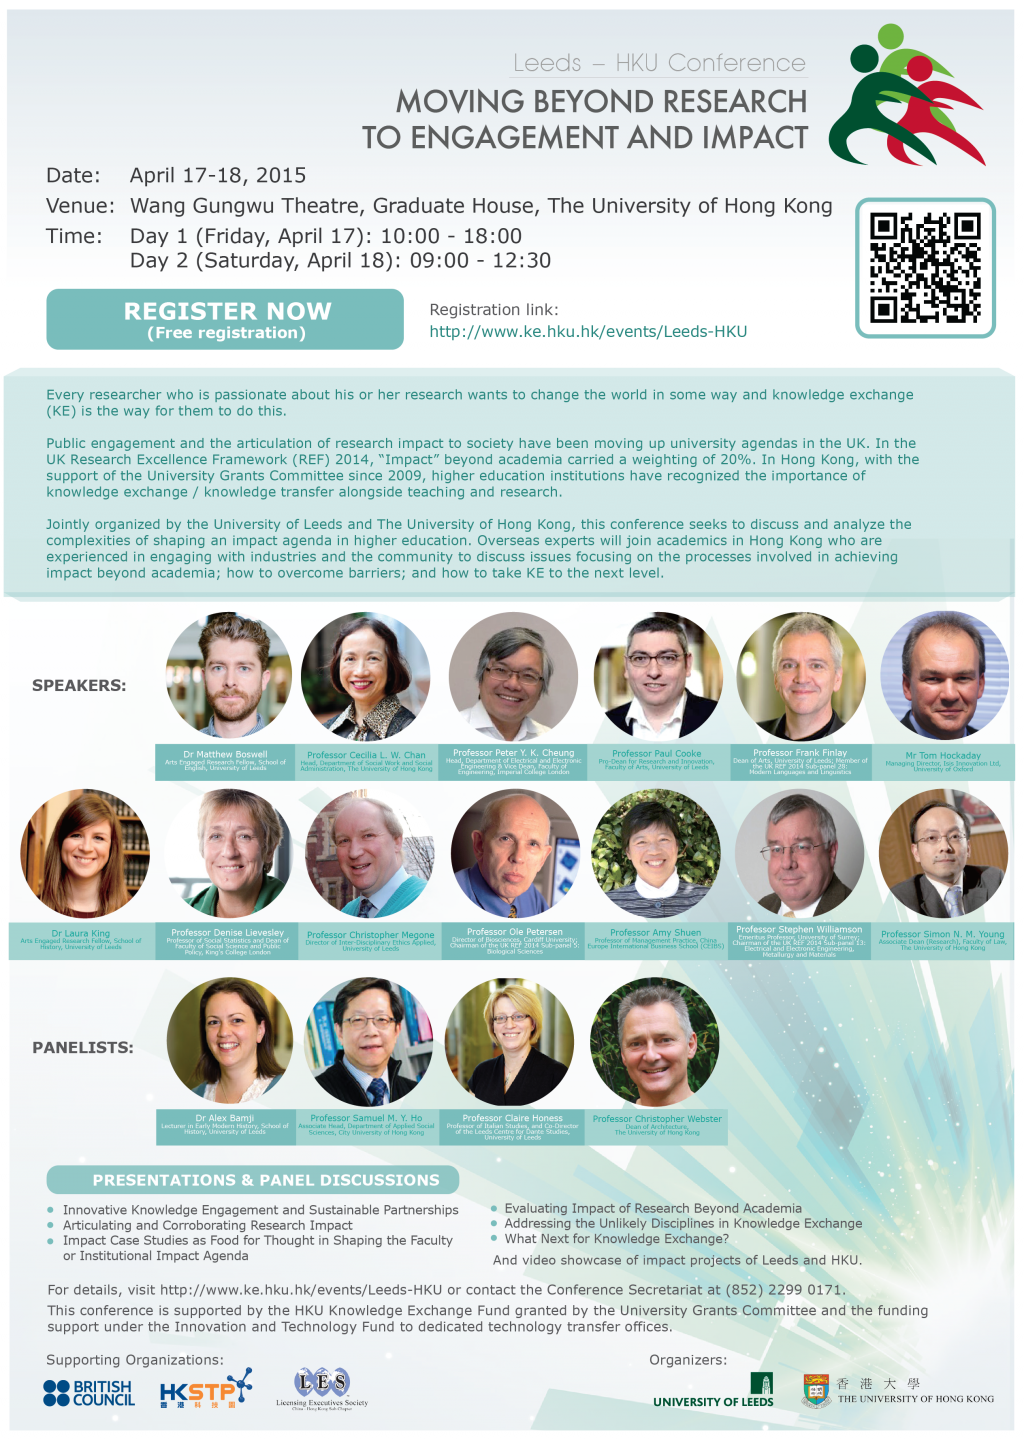 Leeds-HKU Conference: Moving Beyond Research to Engagement and Impact